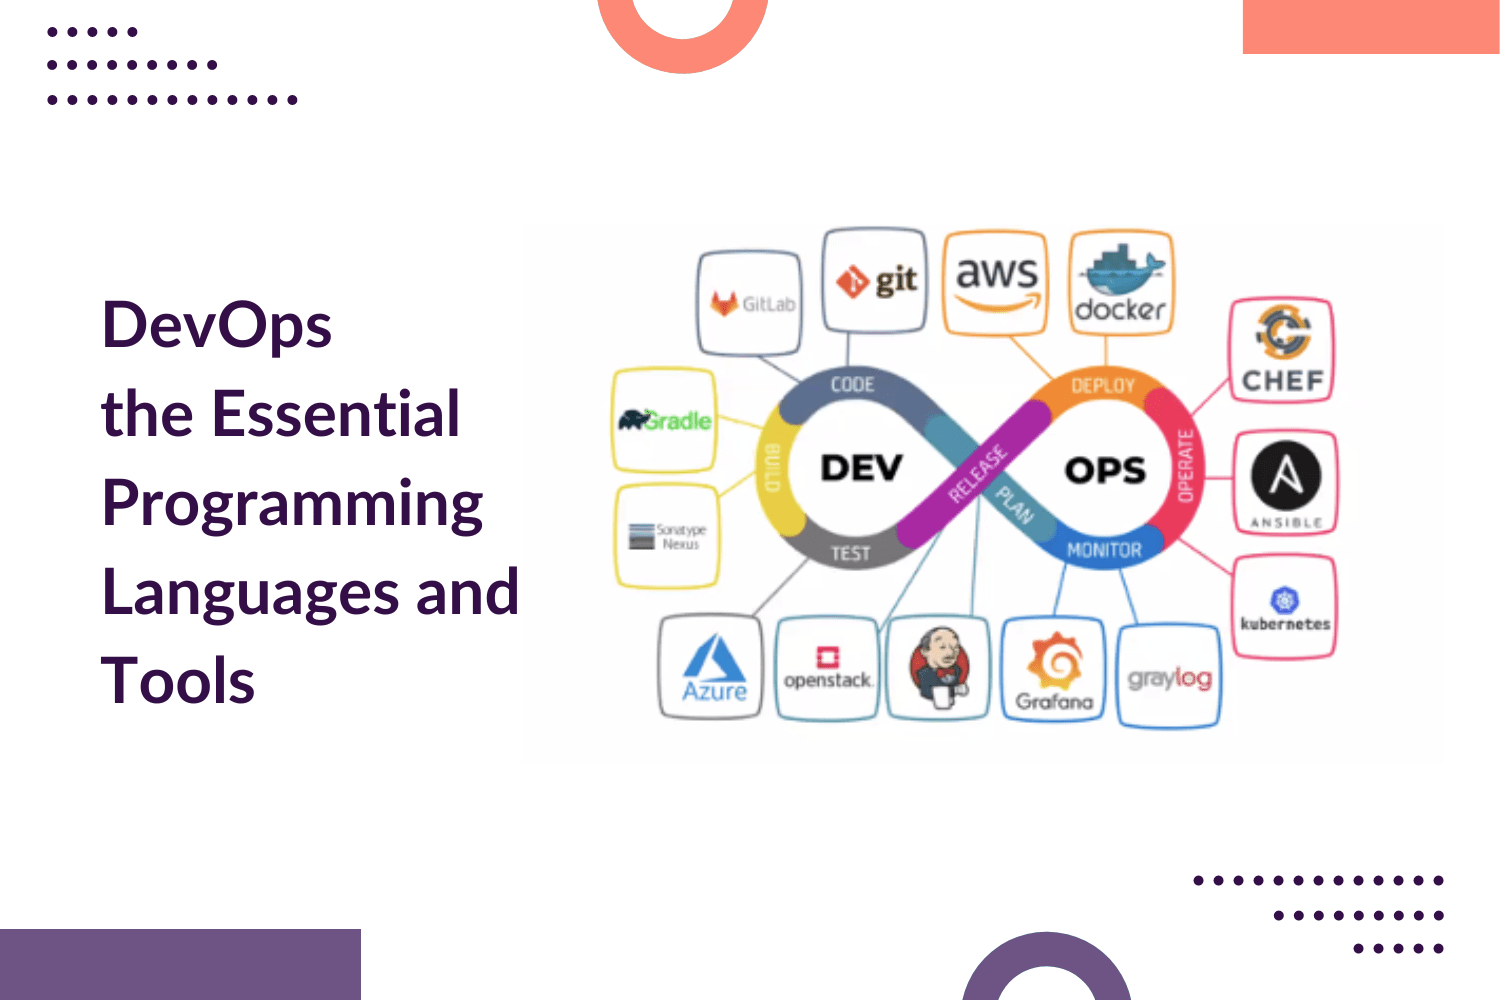 DevOps Exploring the Essential Programming Languages and Tools